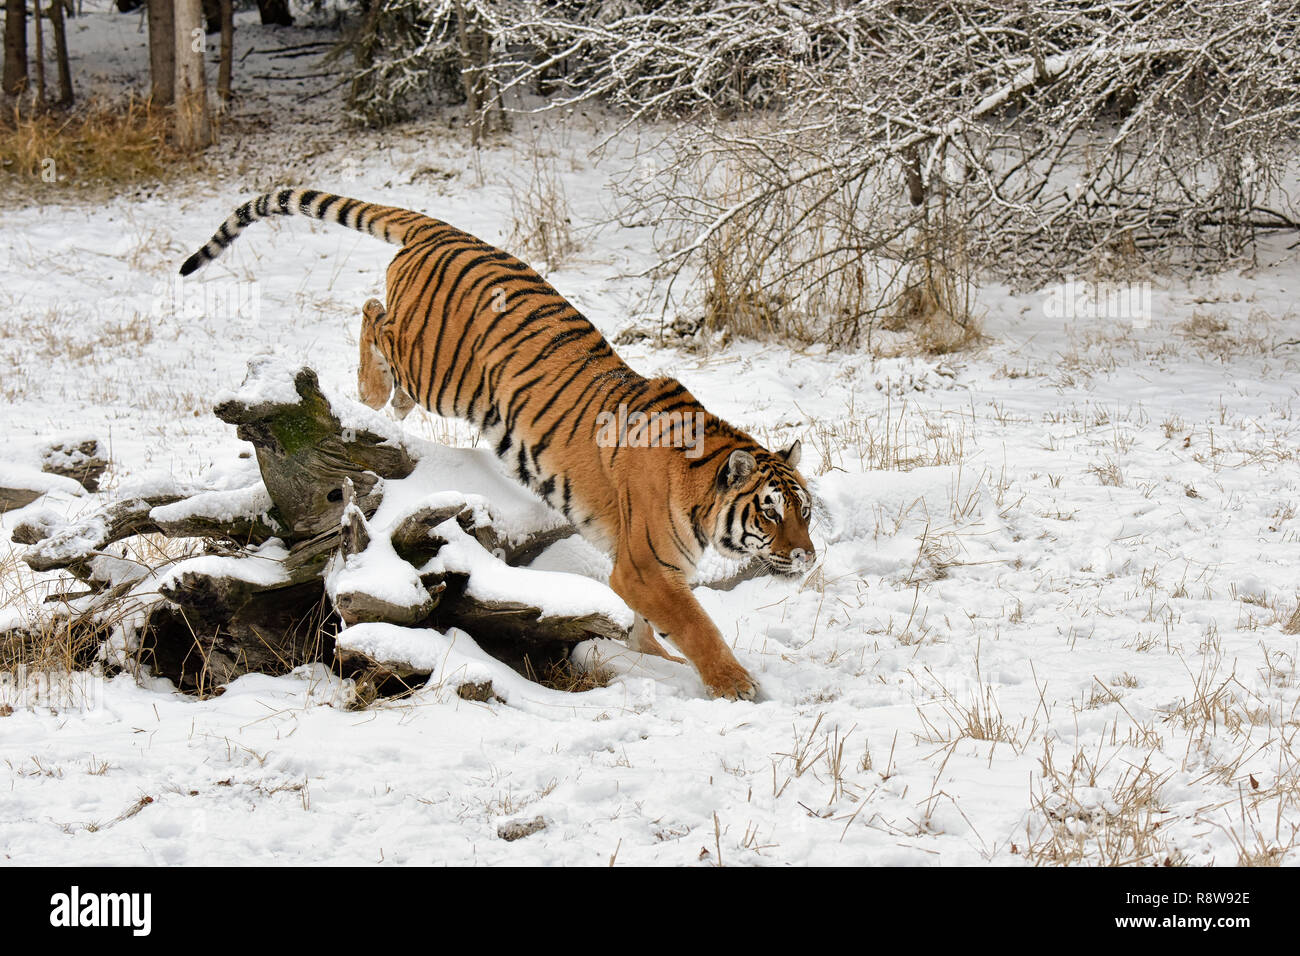 Tiger Completing Jump over a Snow Covered Fallen Log in Winter Stock Photo